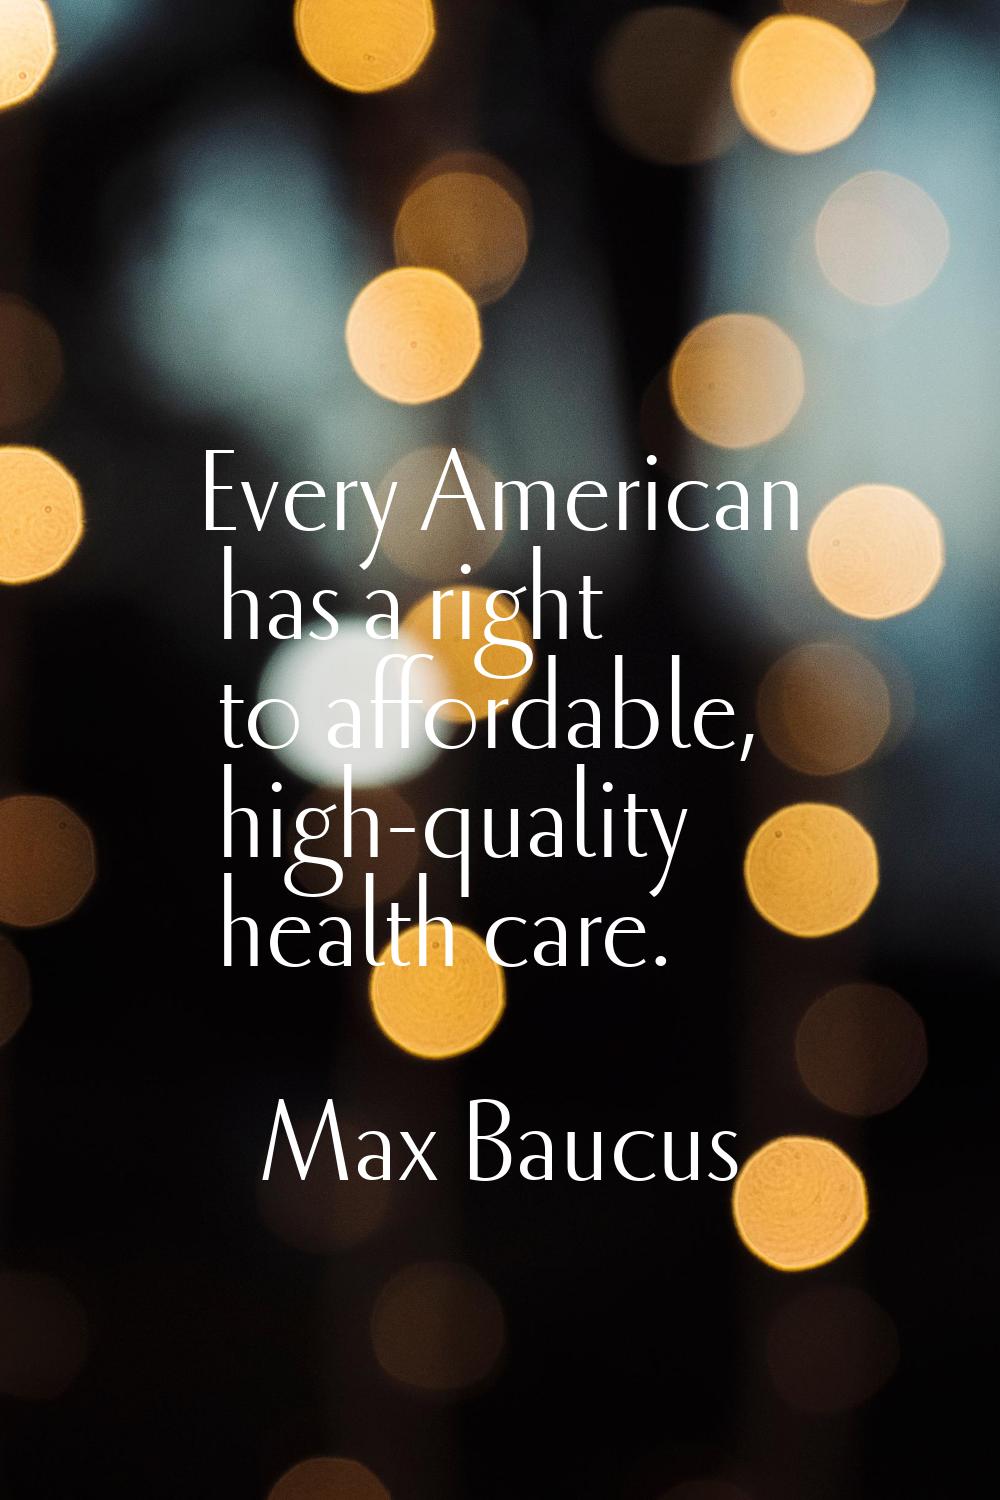 Every American has a right to affordable, high-quality health care.